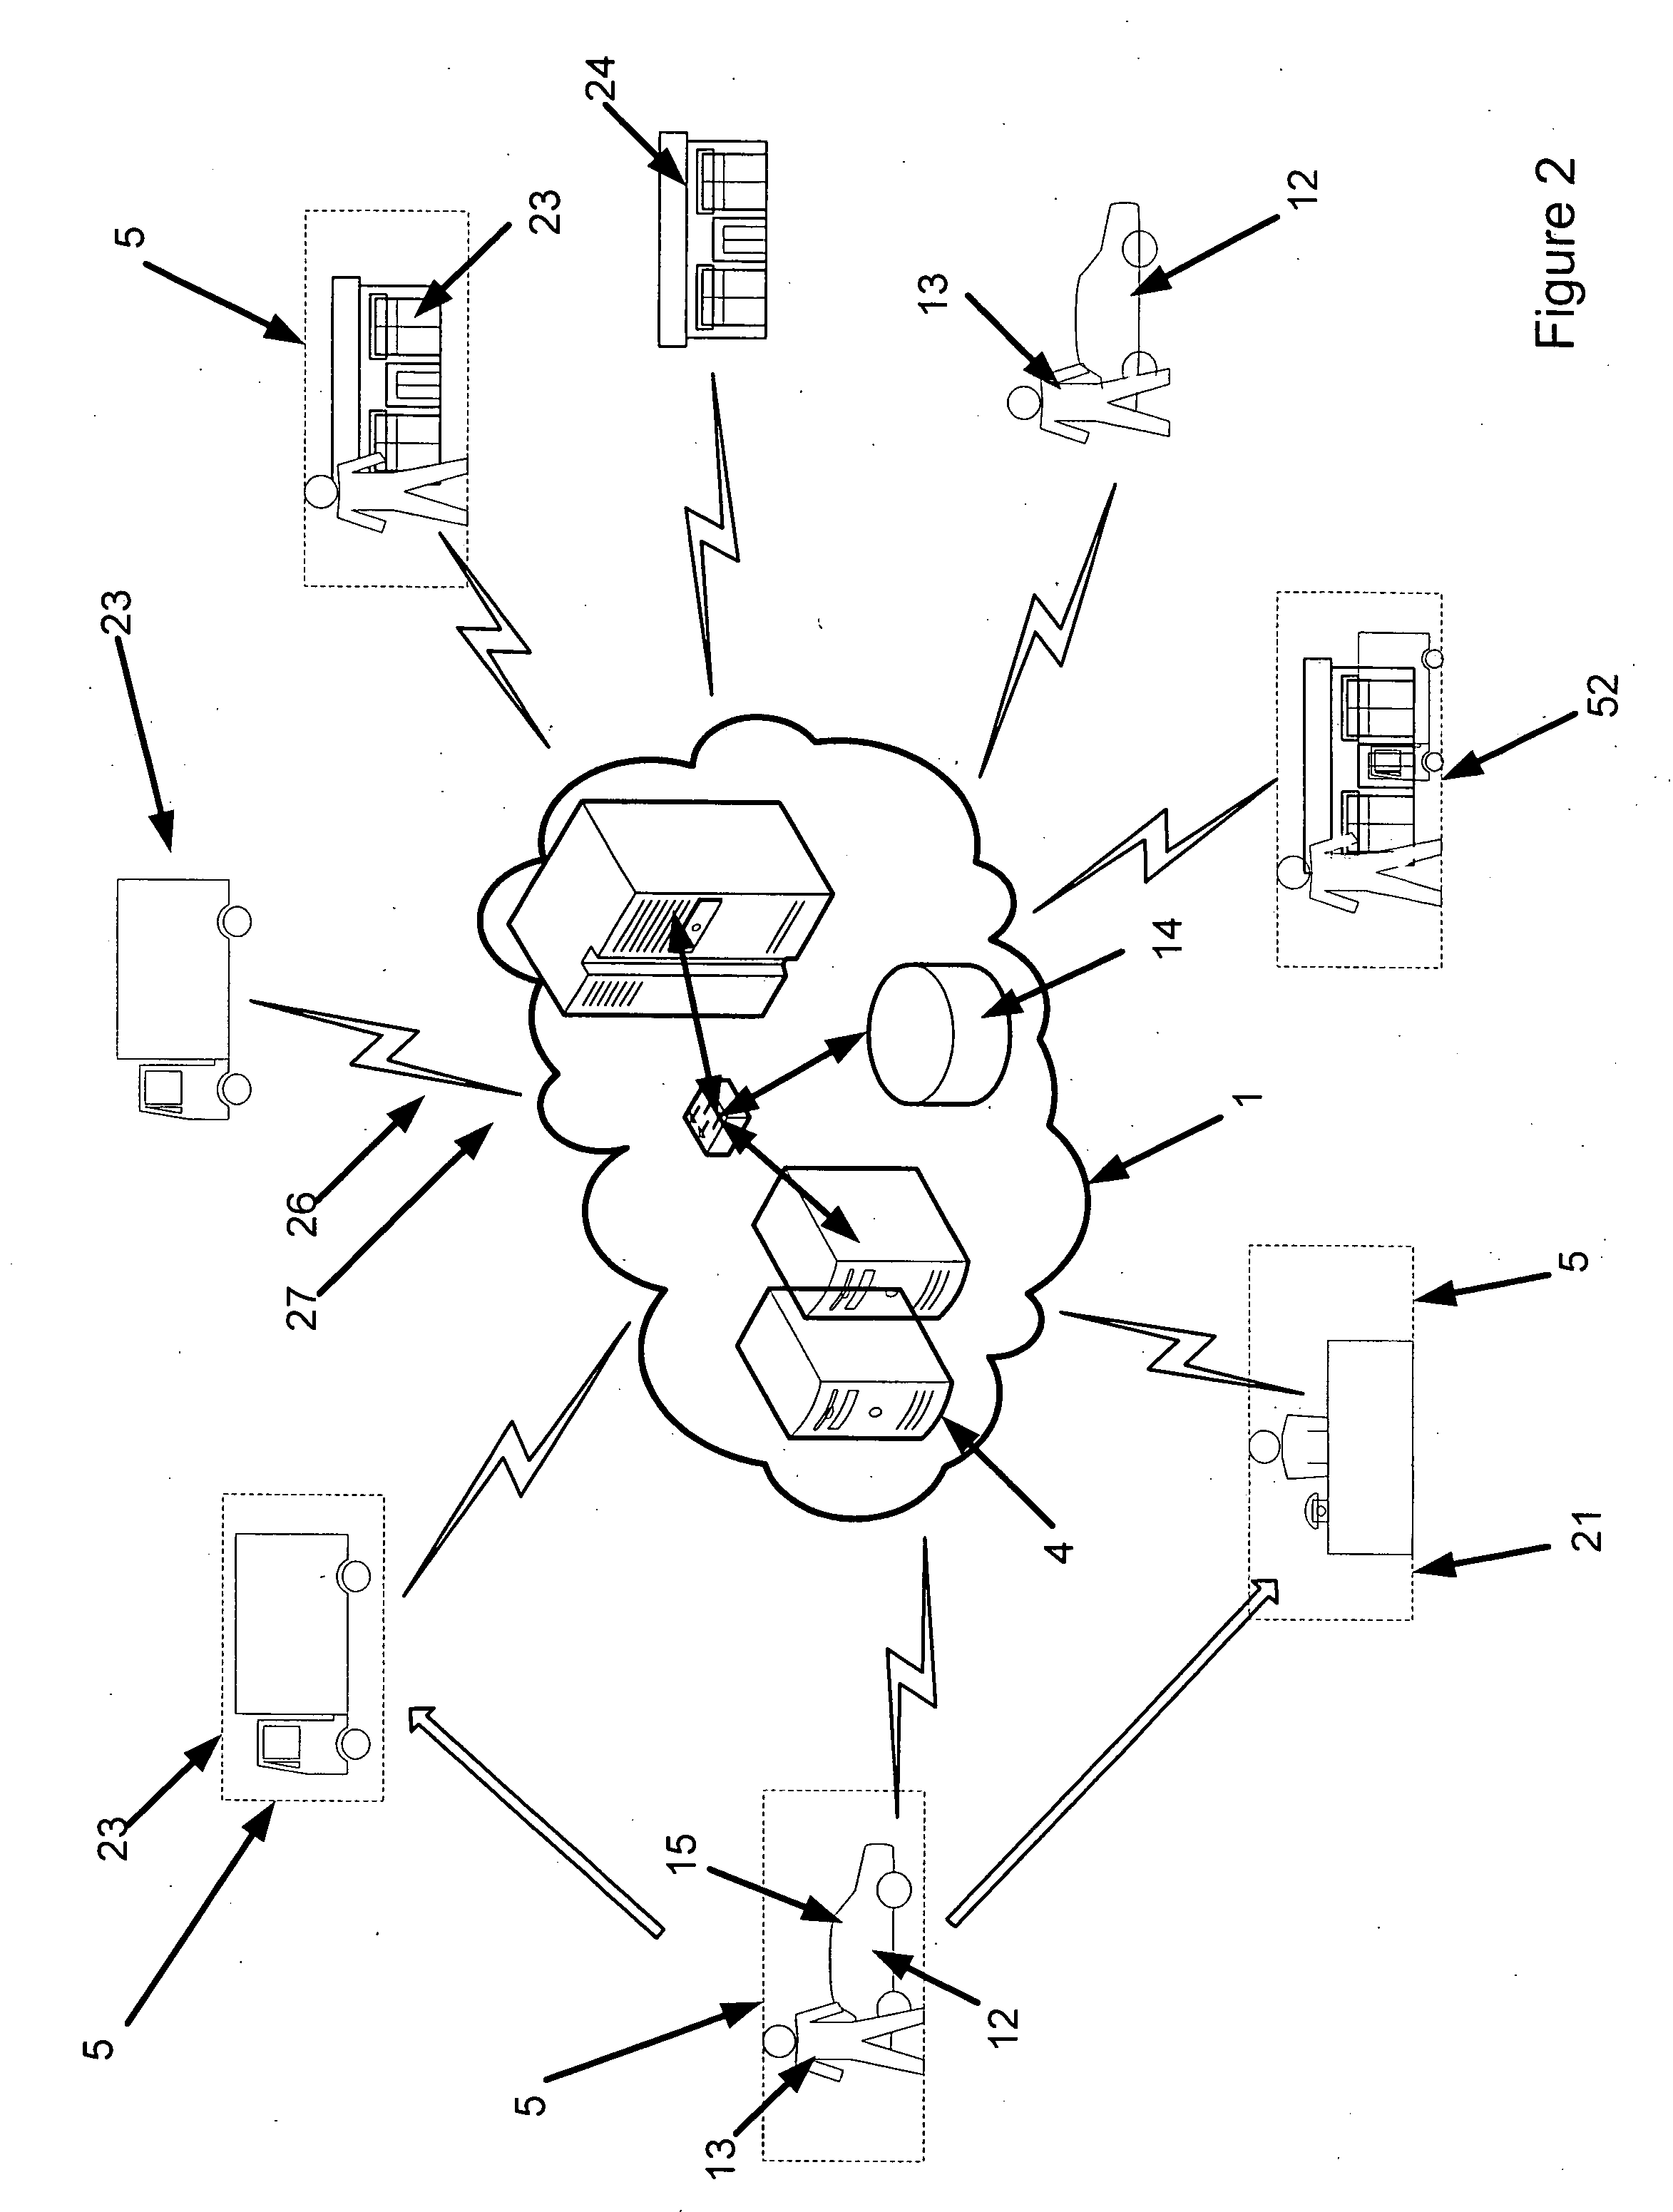 Method and system of managing and administering automotive glass repairs and replacements